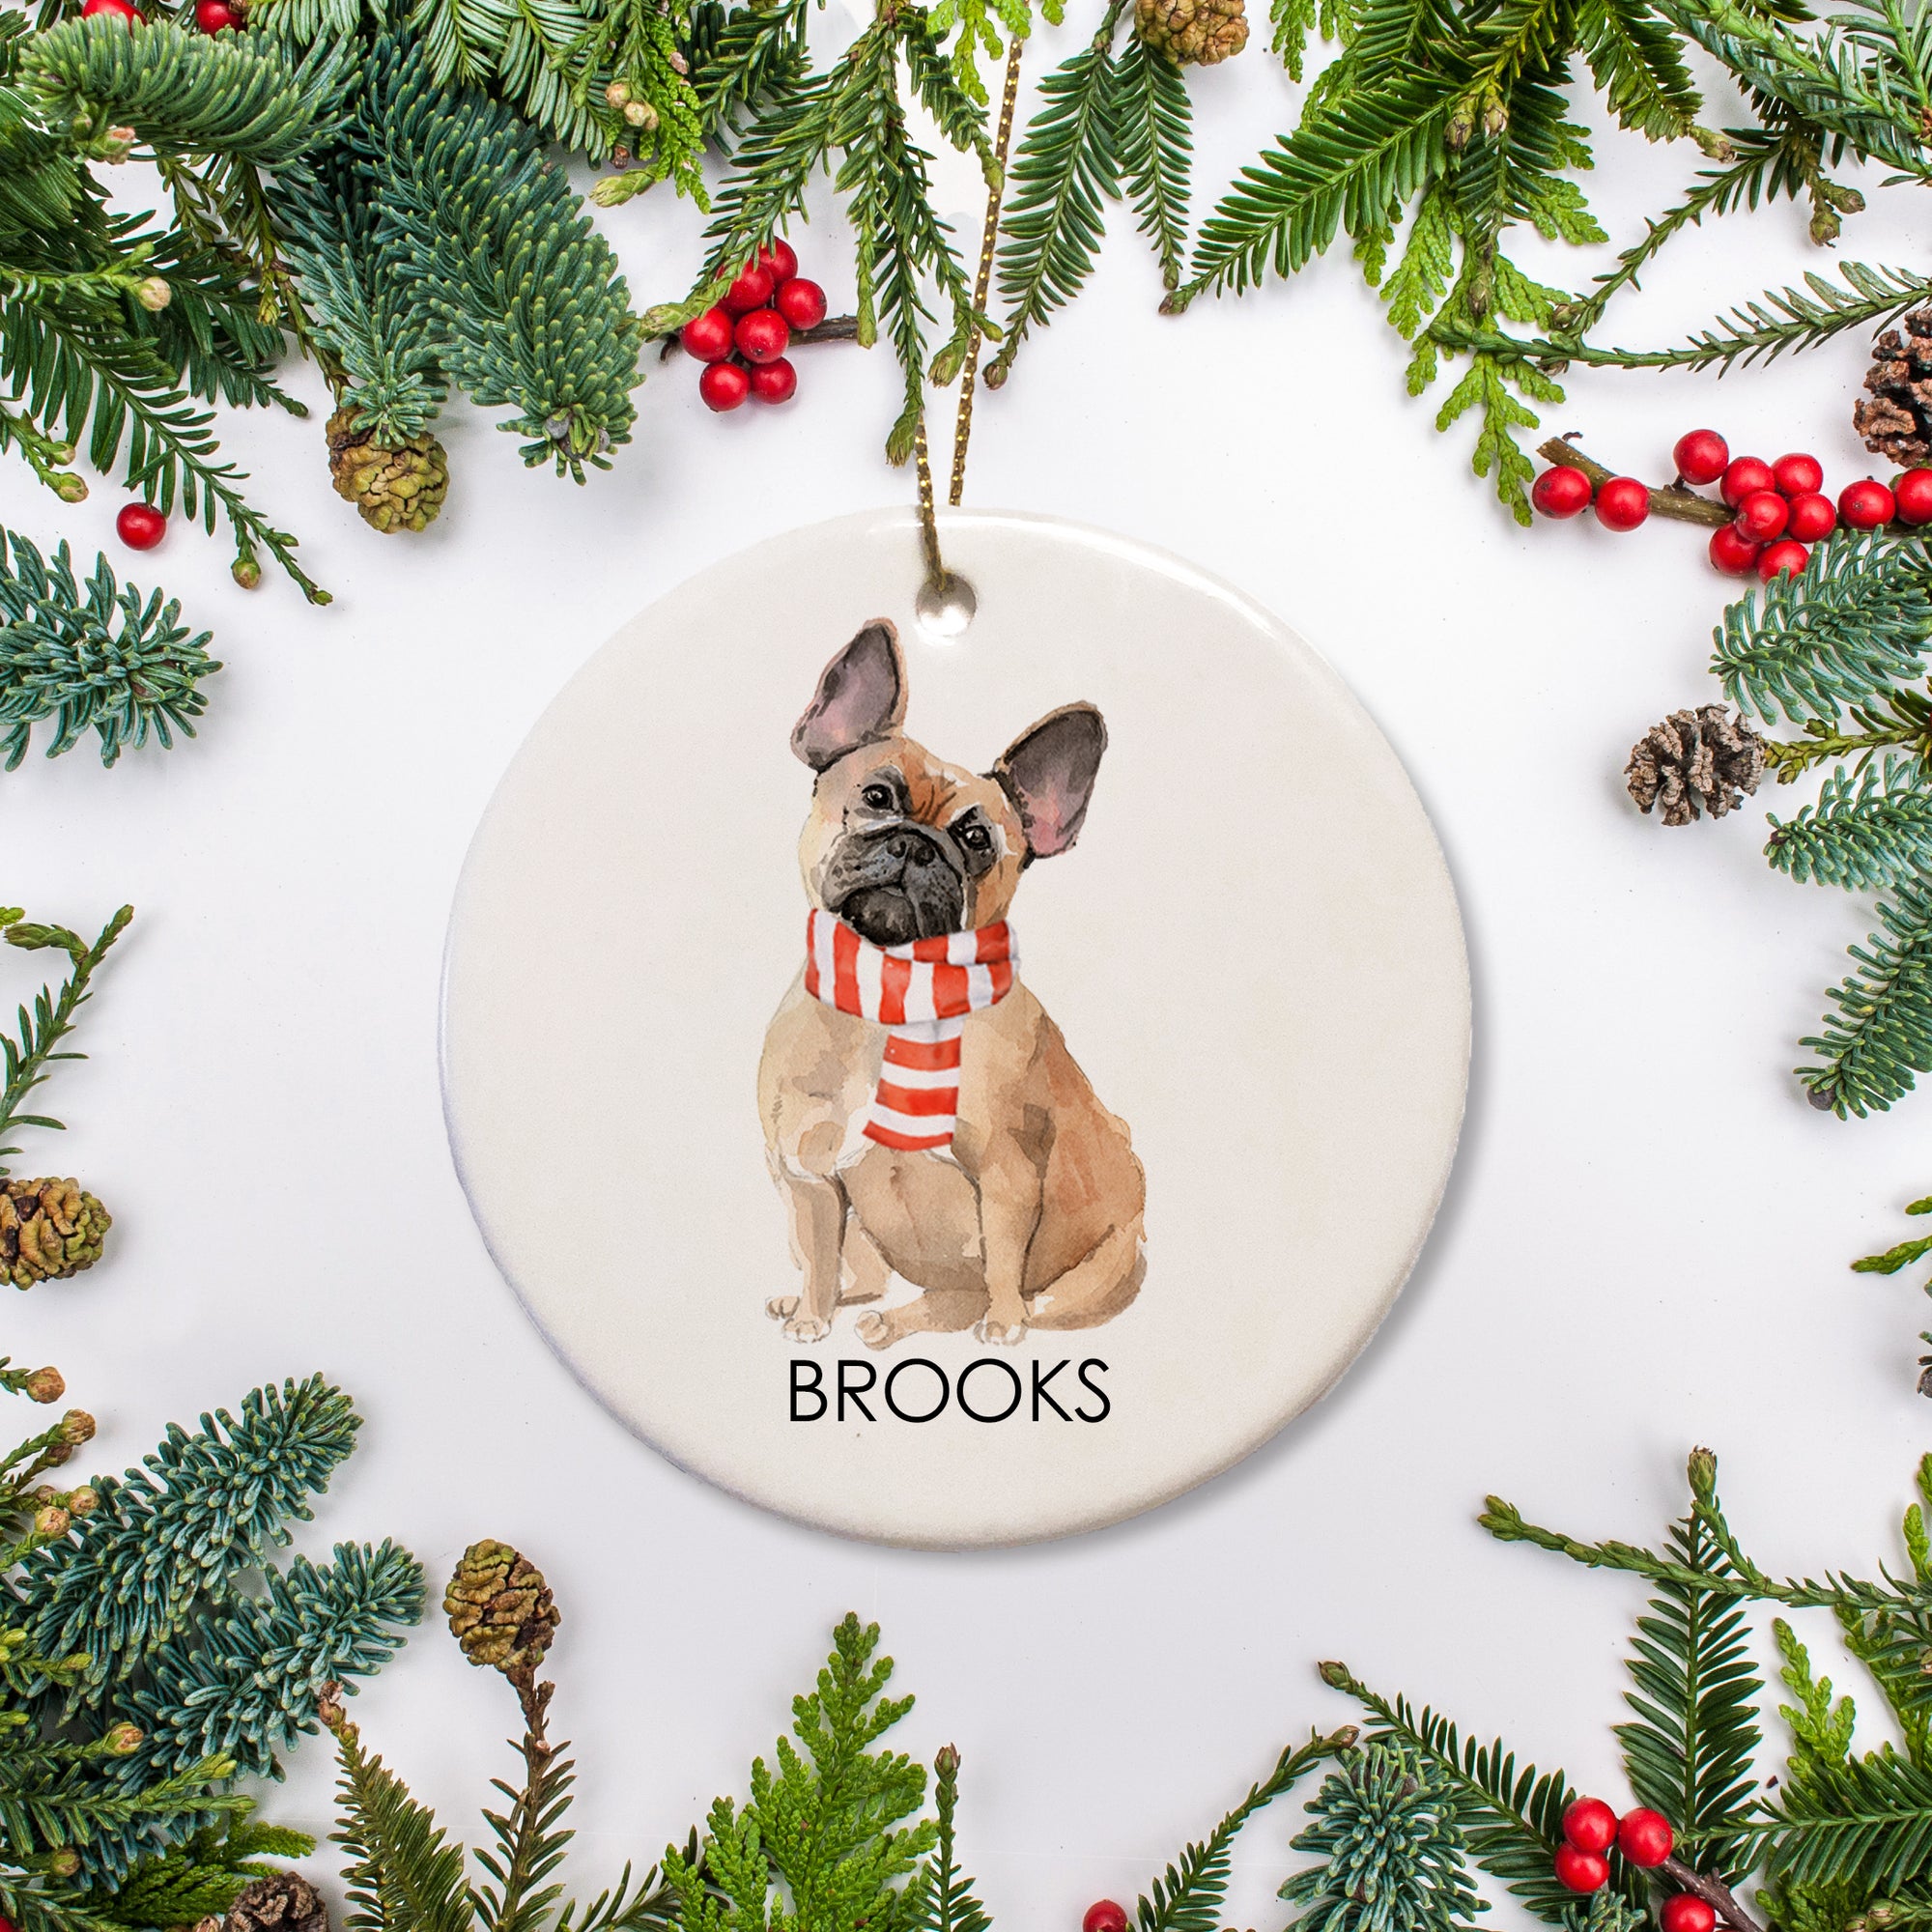 Personalized French Bulldog Christmas ornament, personalized with your dog's name, ceramic, tan fawn colored